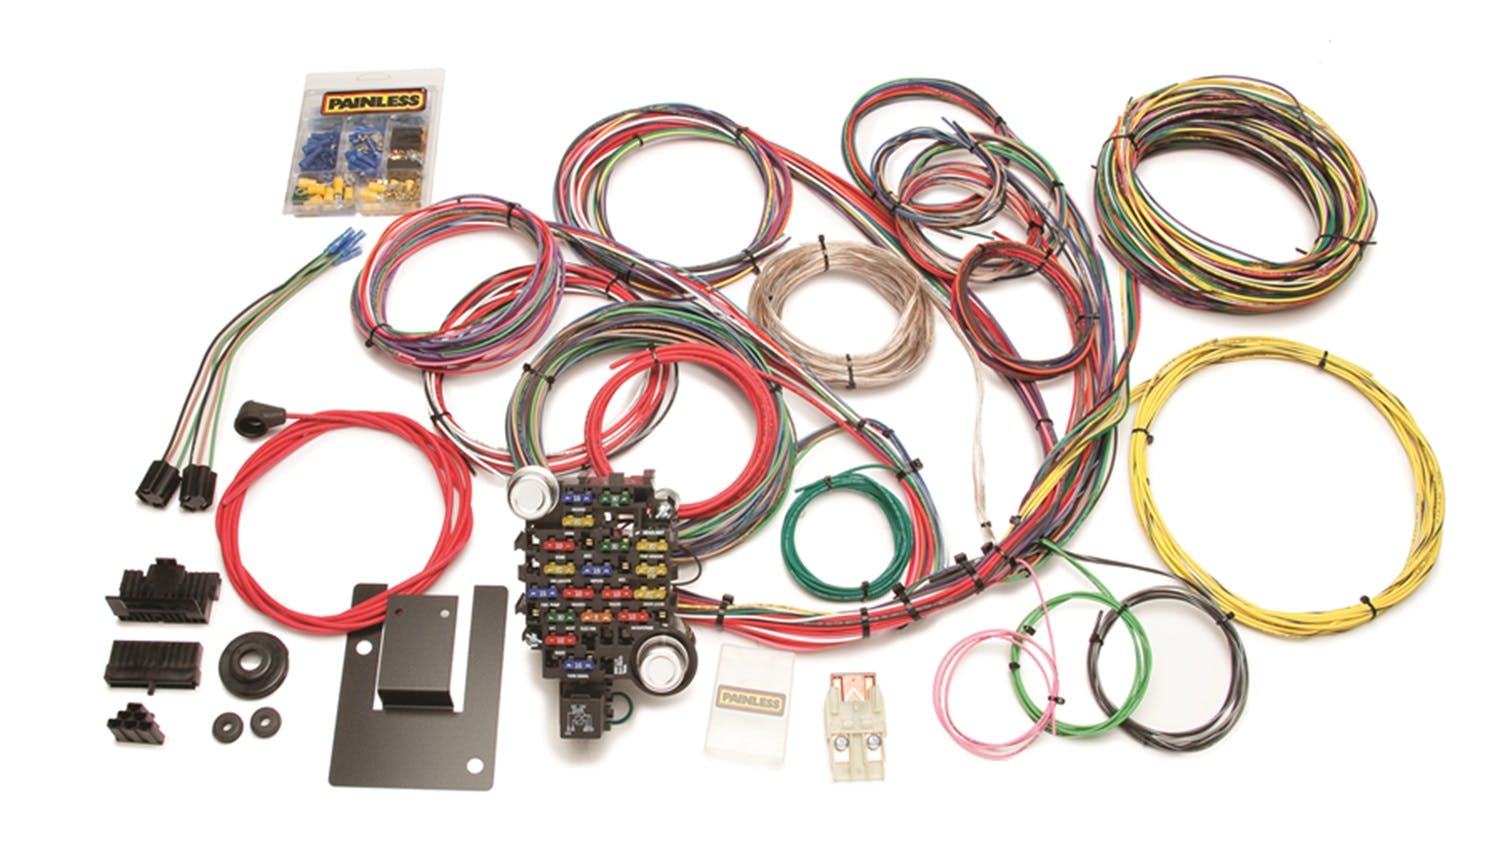 Painless 20106 28 Circuit Wiring Harness